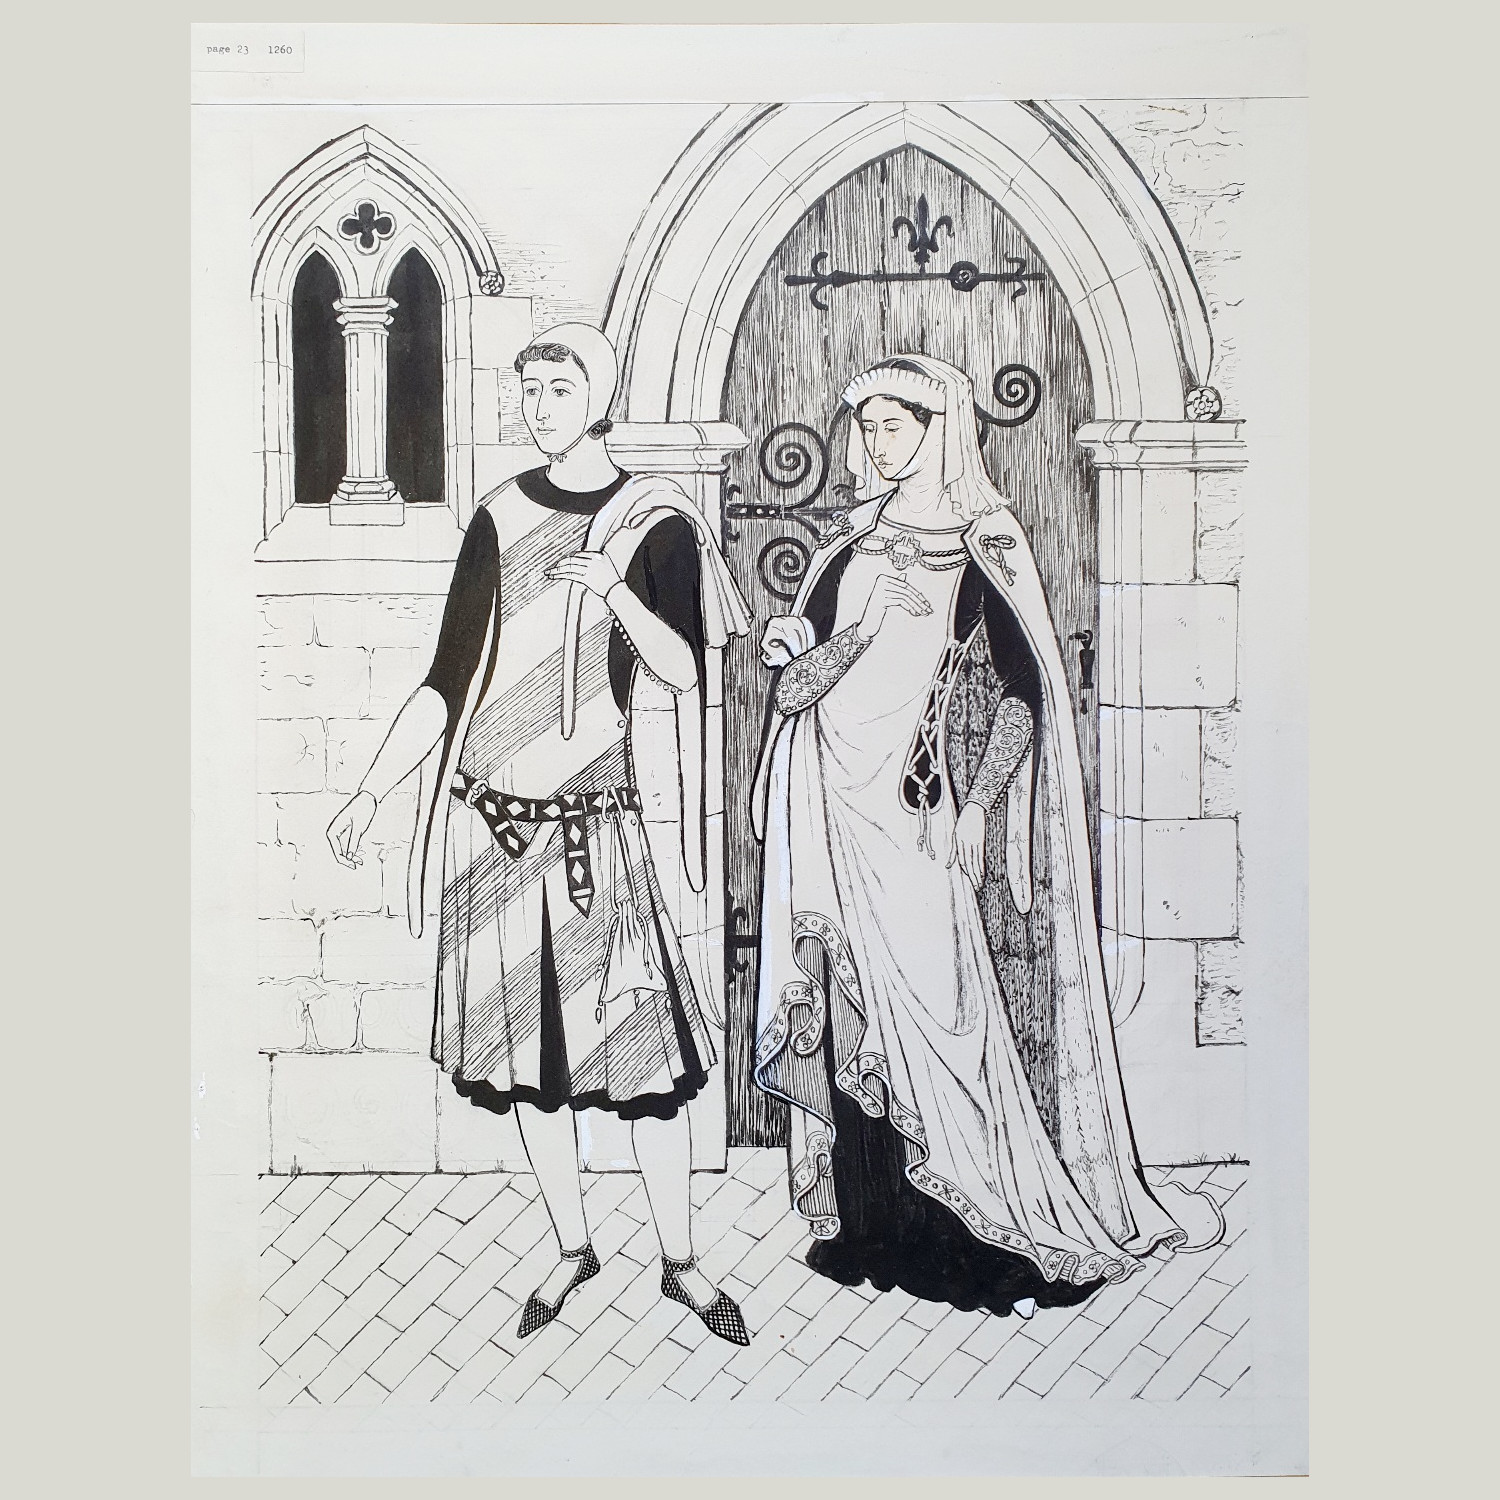 Original drawing by Margot Hamilton Hill depicting fashions from the reign of Henry III, 1260